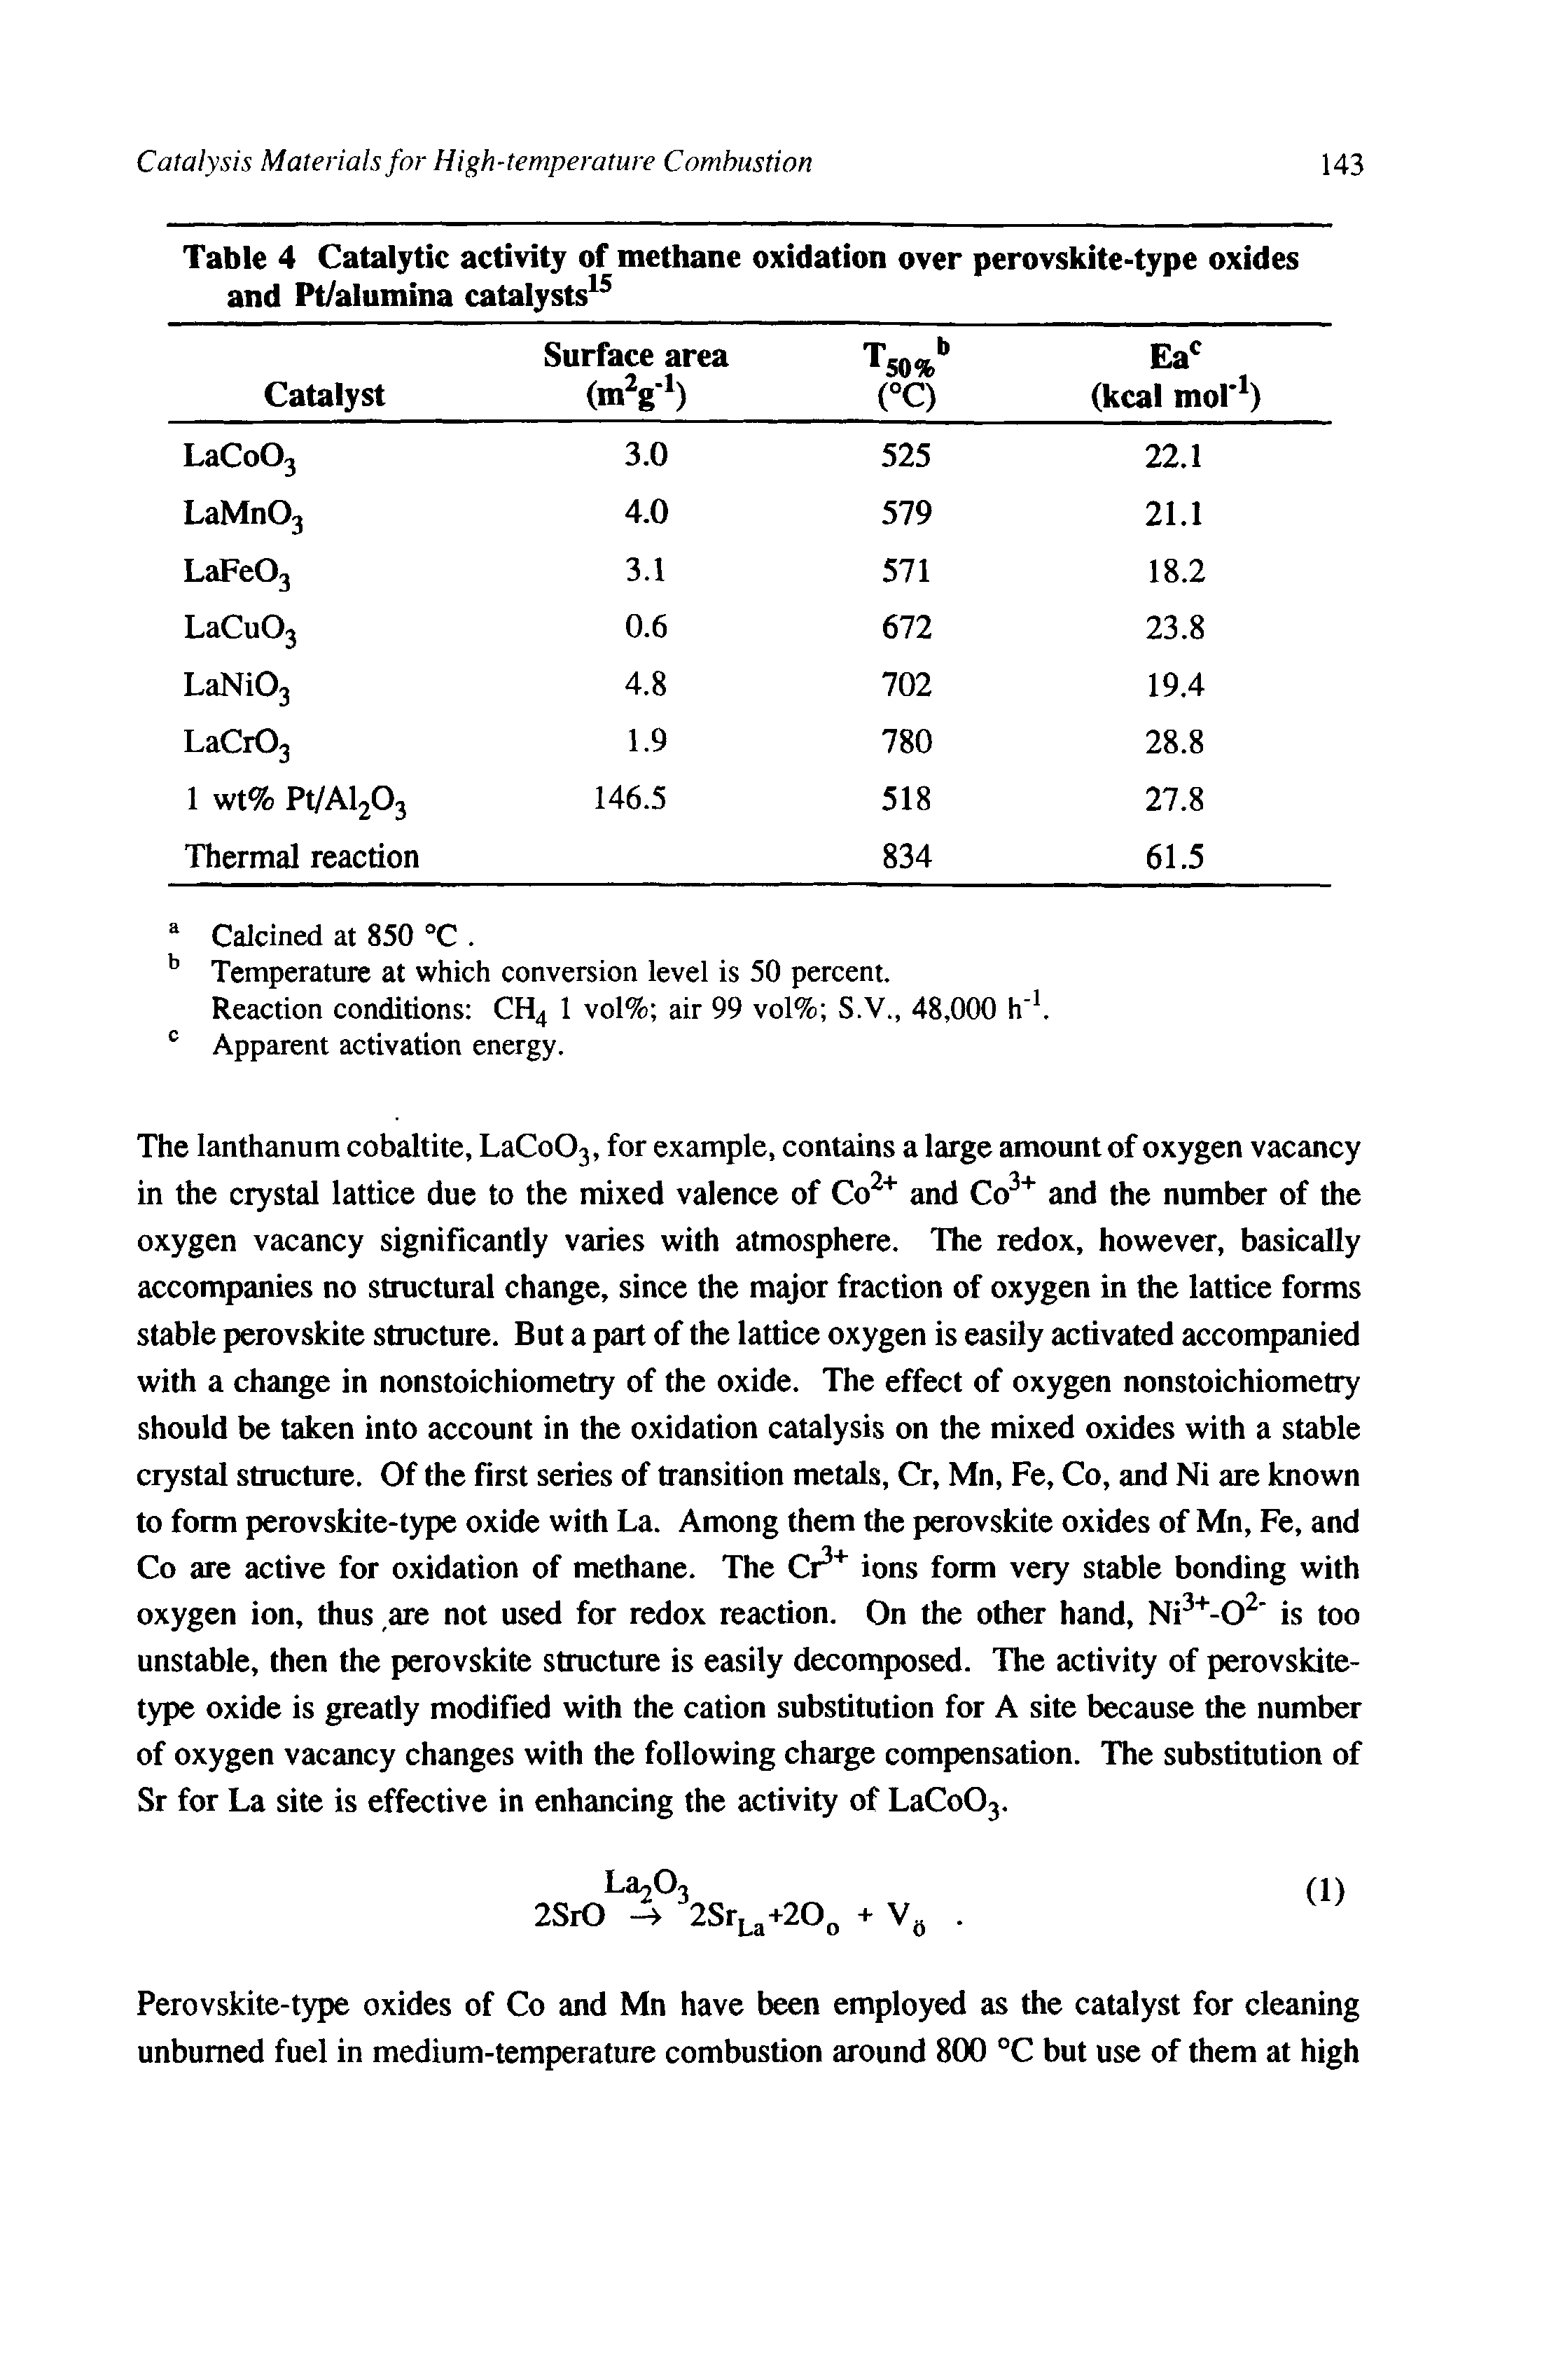 Table 4 Catalytic activity of methane oxidation over perovskite-type oxides and Pt/alumina catalysts ...